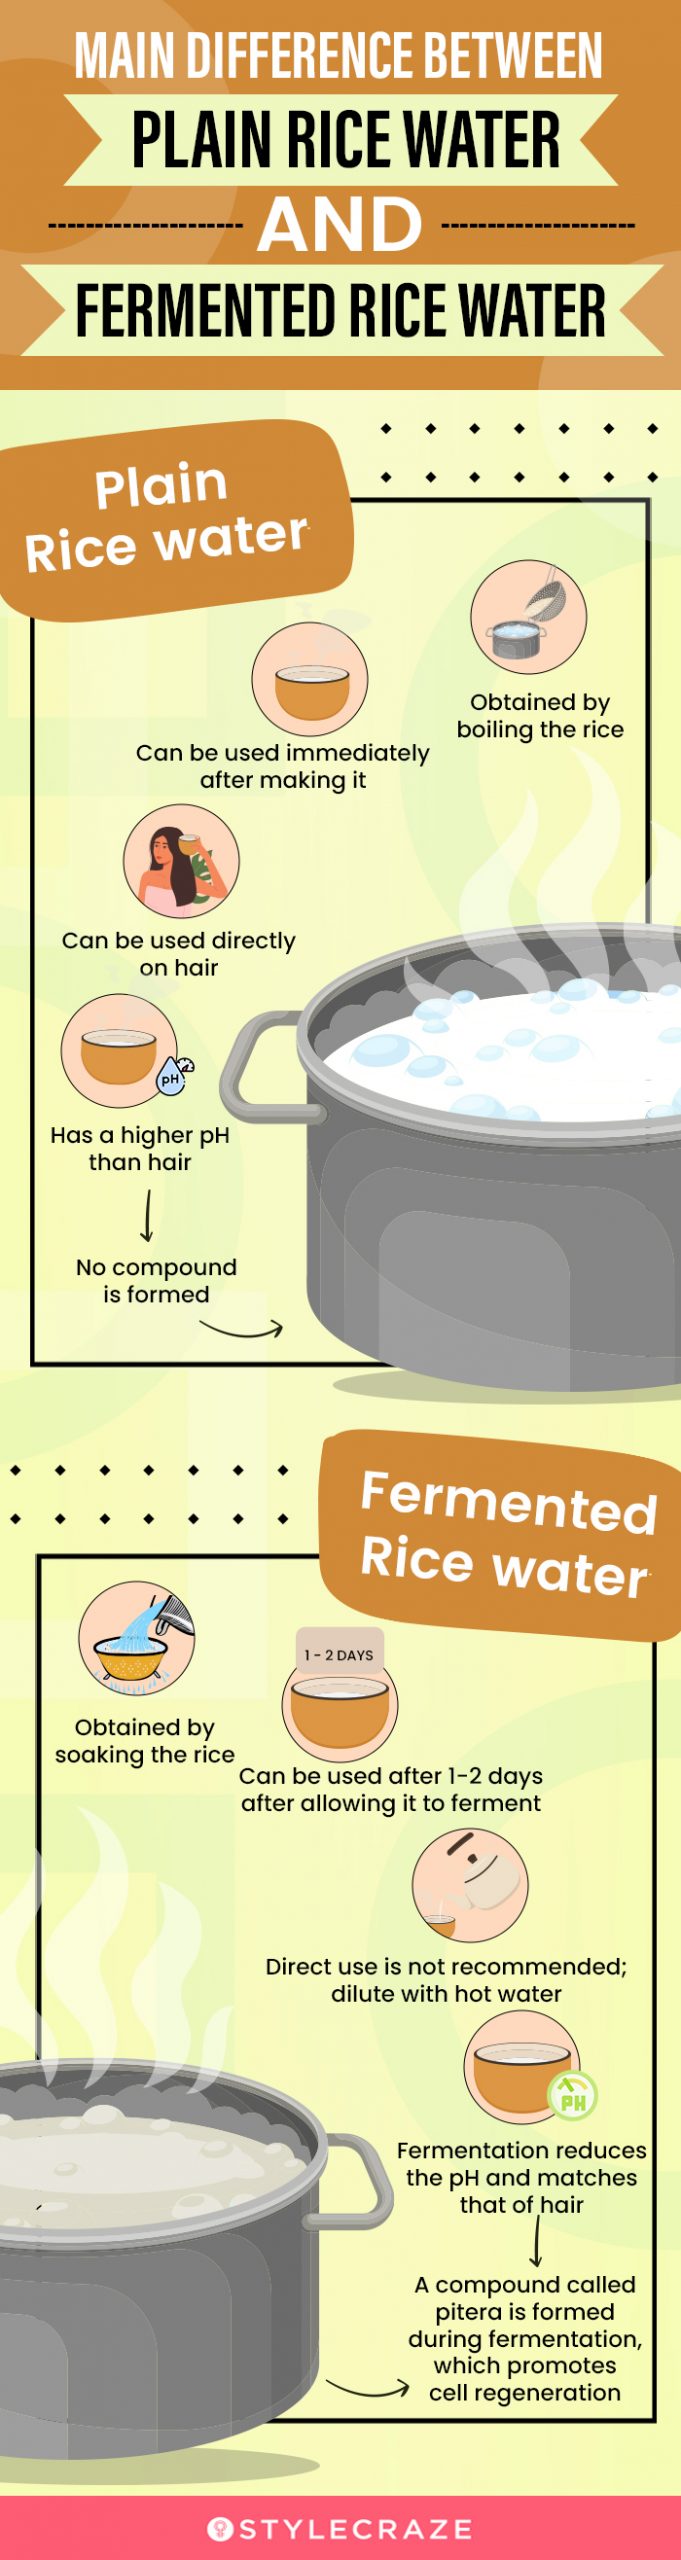 How To Use Rice Water For Hair - 2 Methods To Try